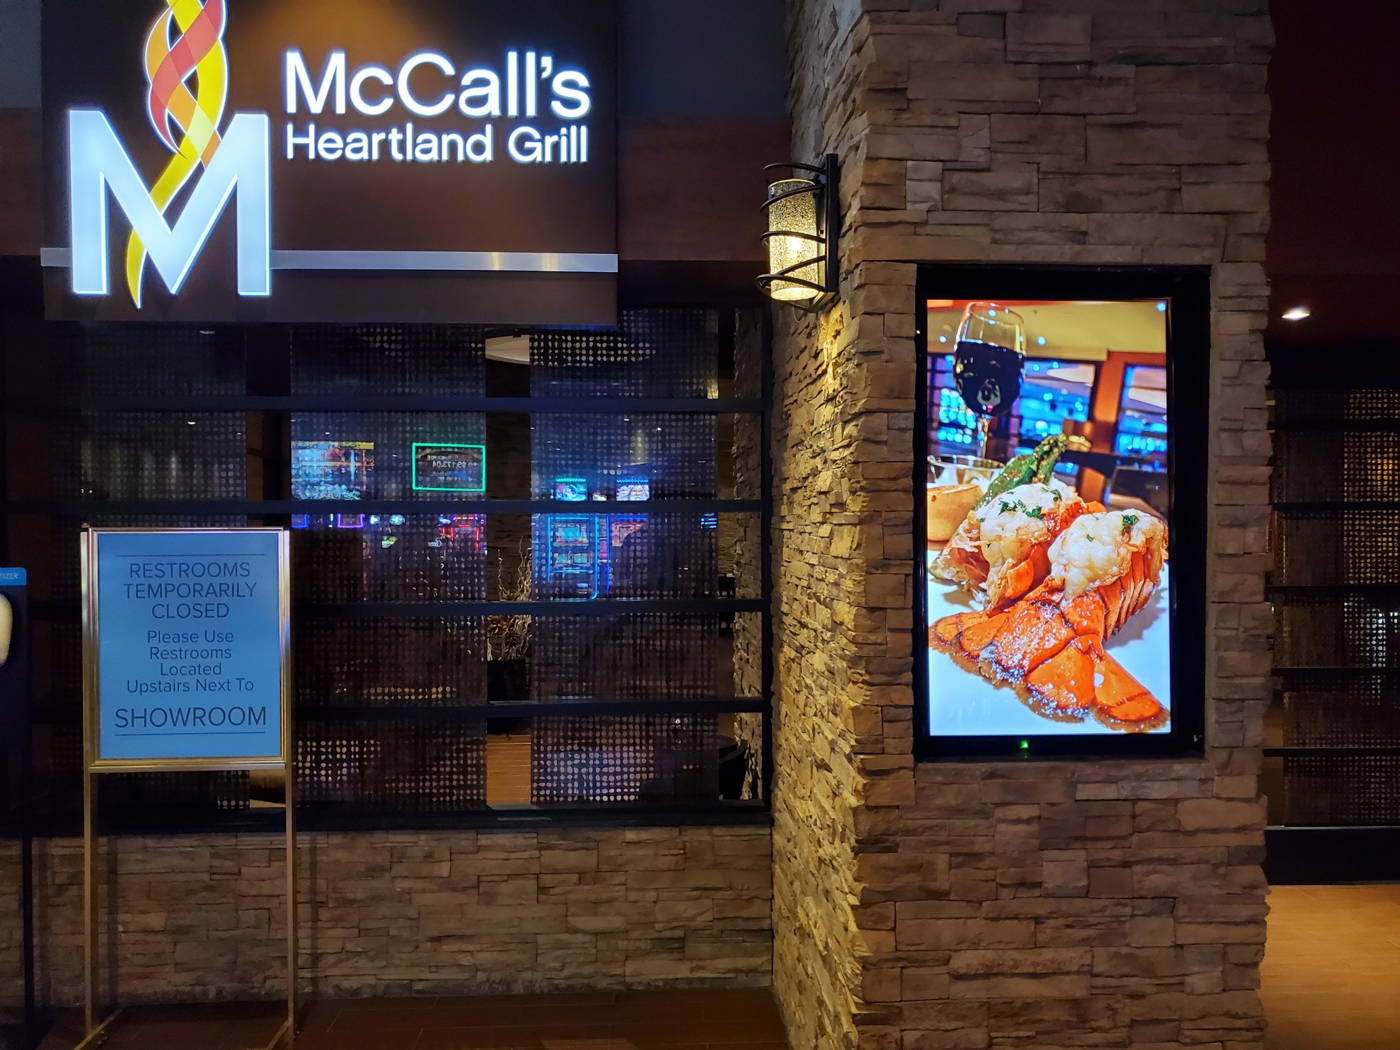 McCall's Heartland Grill at The Strat Las Vegas